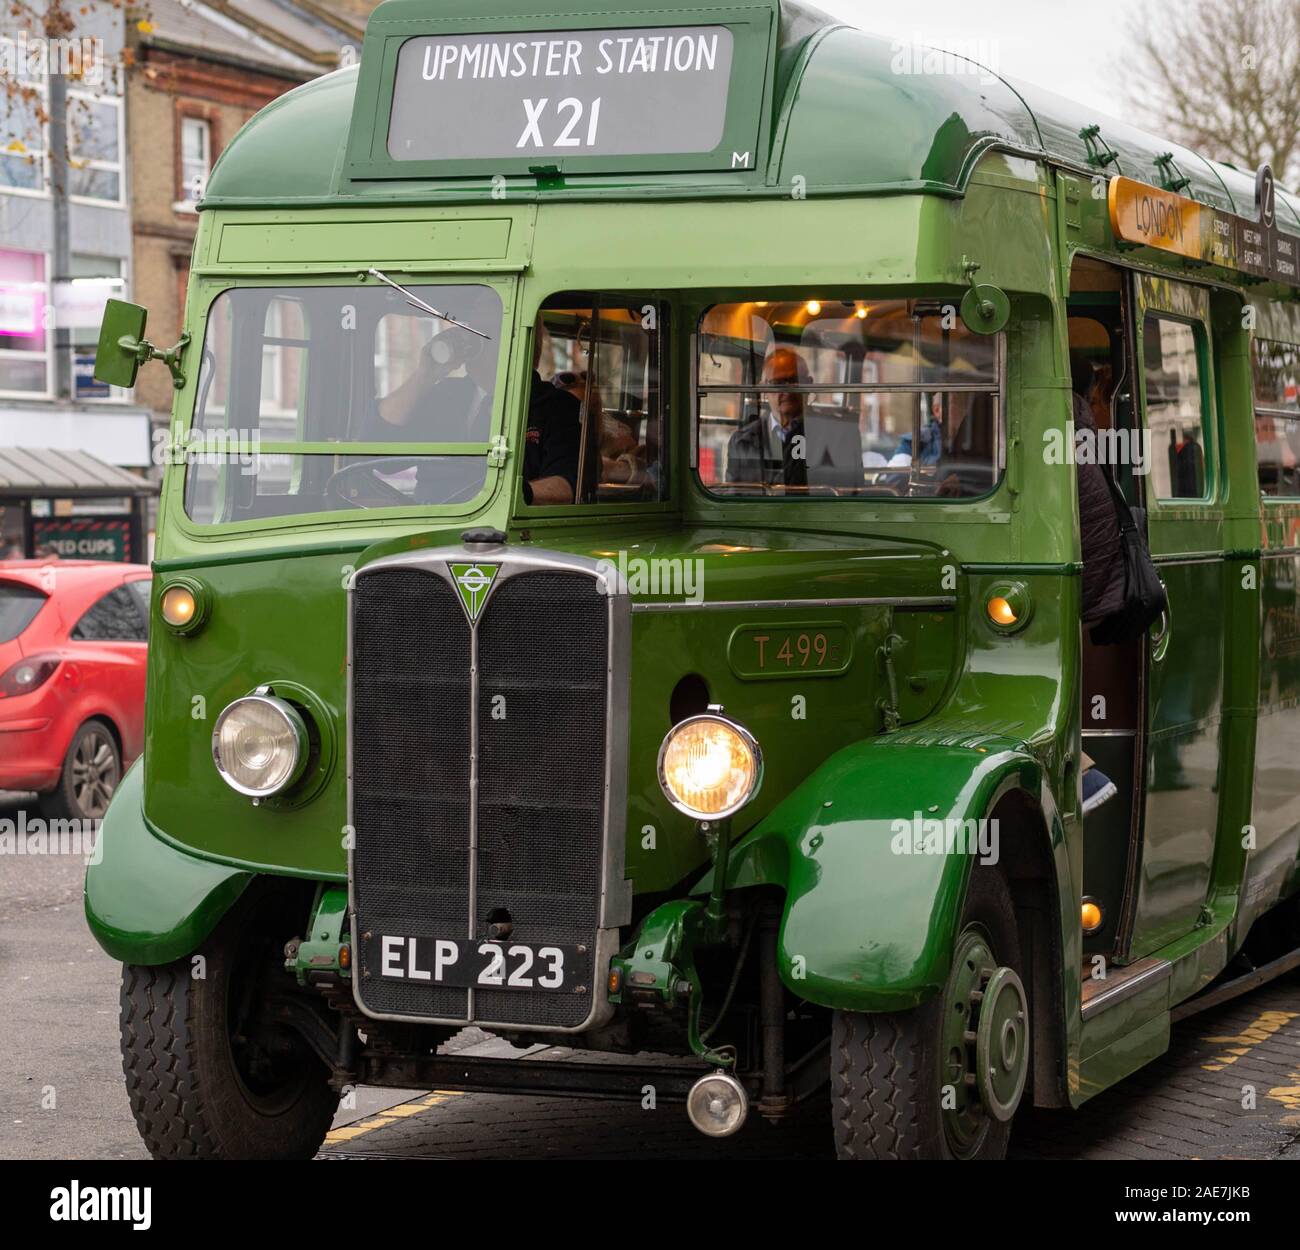 Brentwood Essex UK, 7th Dec. 2019 Ensign Bus Vintage running day.  Ensign bus company runs its fleet of vintage buses on selected routes on the first saturday in December, seen here in Brentwood, Essex UK High Street 1938 Green Line AEC Regal O662 T499 (ELP 223 Credit Ian DavidsonAlamy Live News Stock Photo